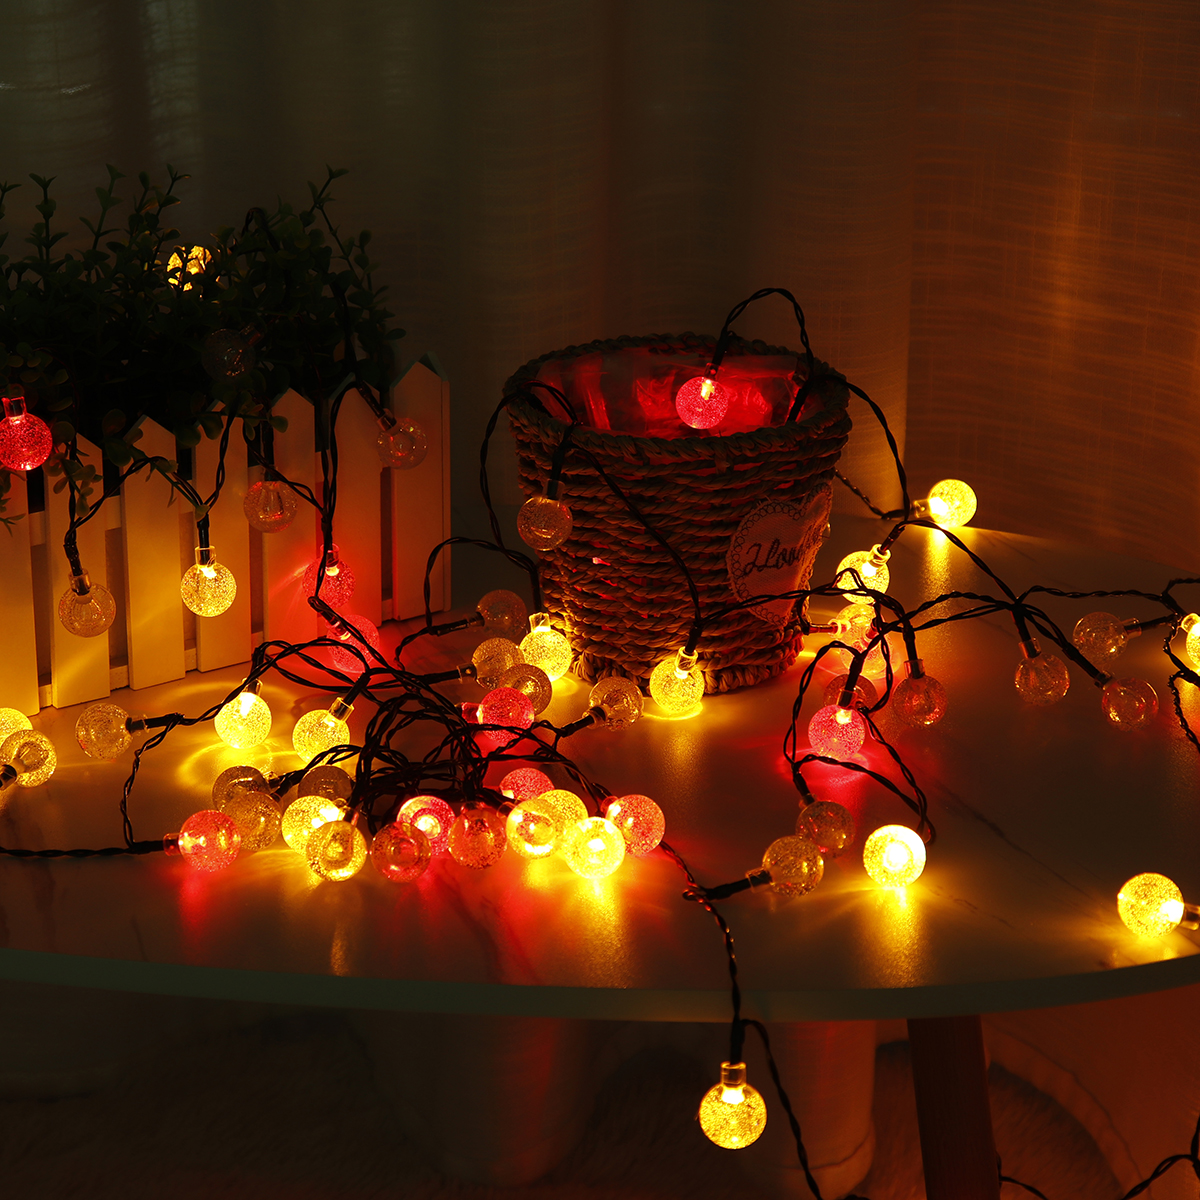 Outdoor-95M-50LEDs-String-Ball-Light-Remote-Control-8-Modes-Waterproof-Garden-Party-Wedding-Christma-1747631-7